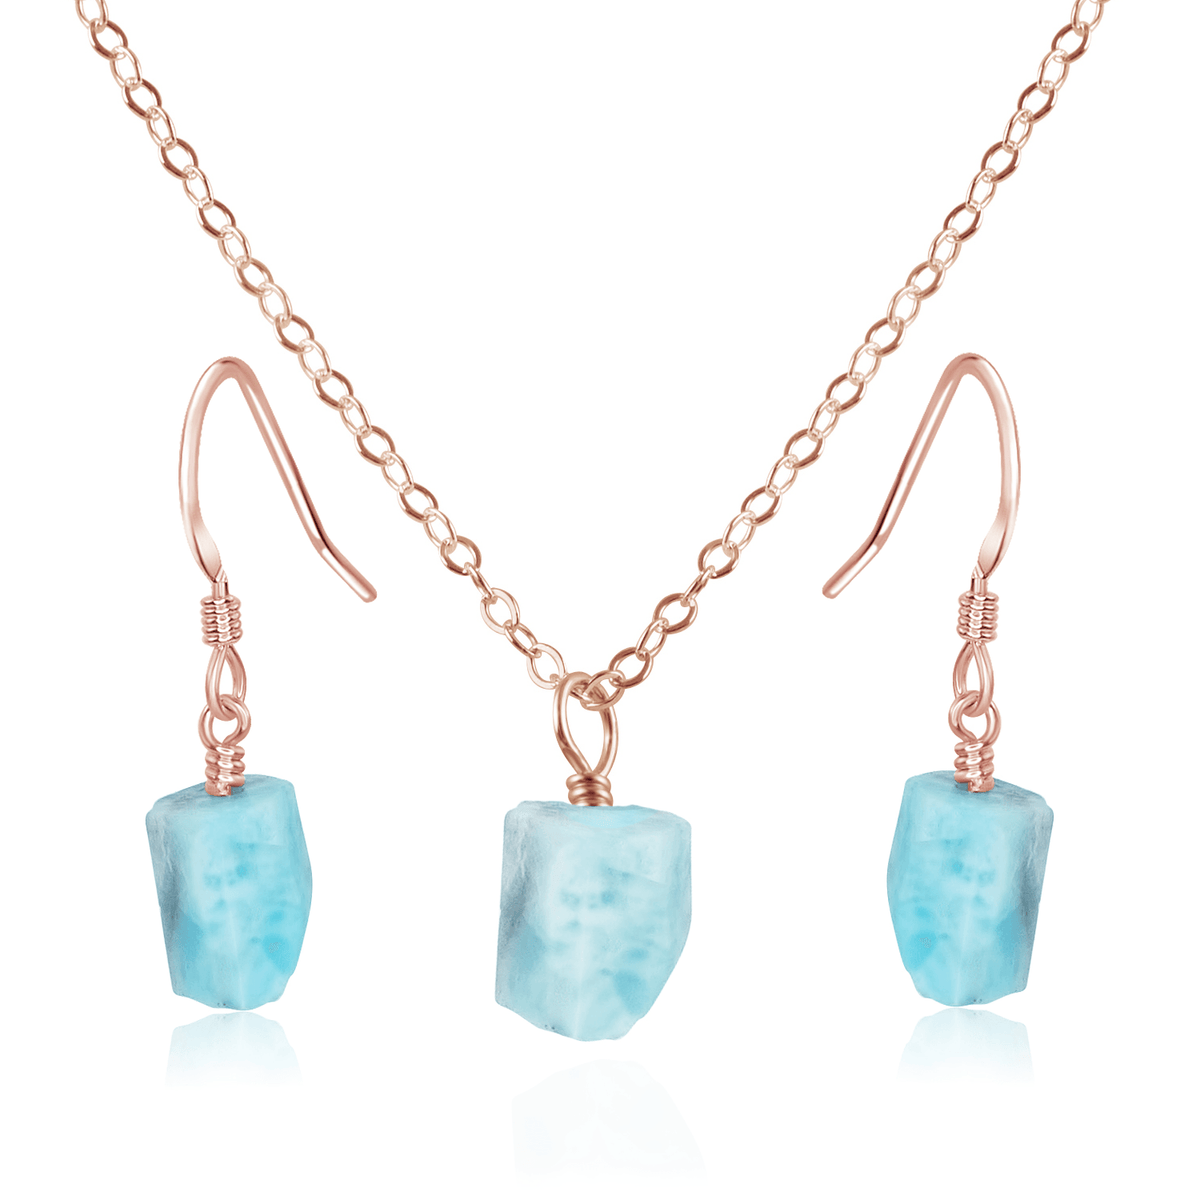 Raw Larimar Crystal Earrings & Necklace Set - Raw Larimar Crystal Earrings & Necklace Set - 14k Rose Gold Fill / Cable - Luna Tide Handmade Crystal Jewellery